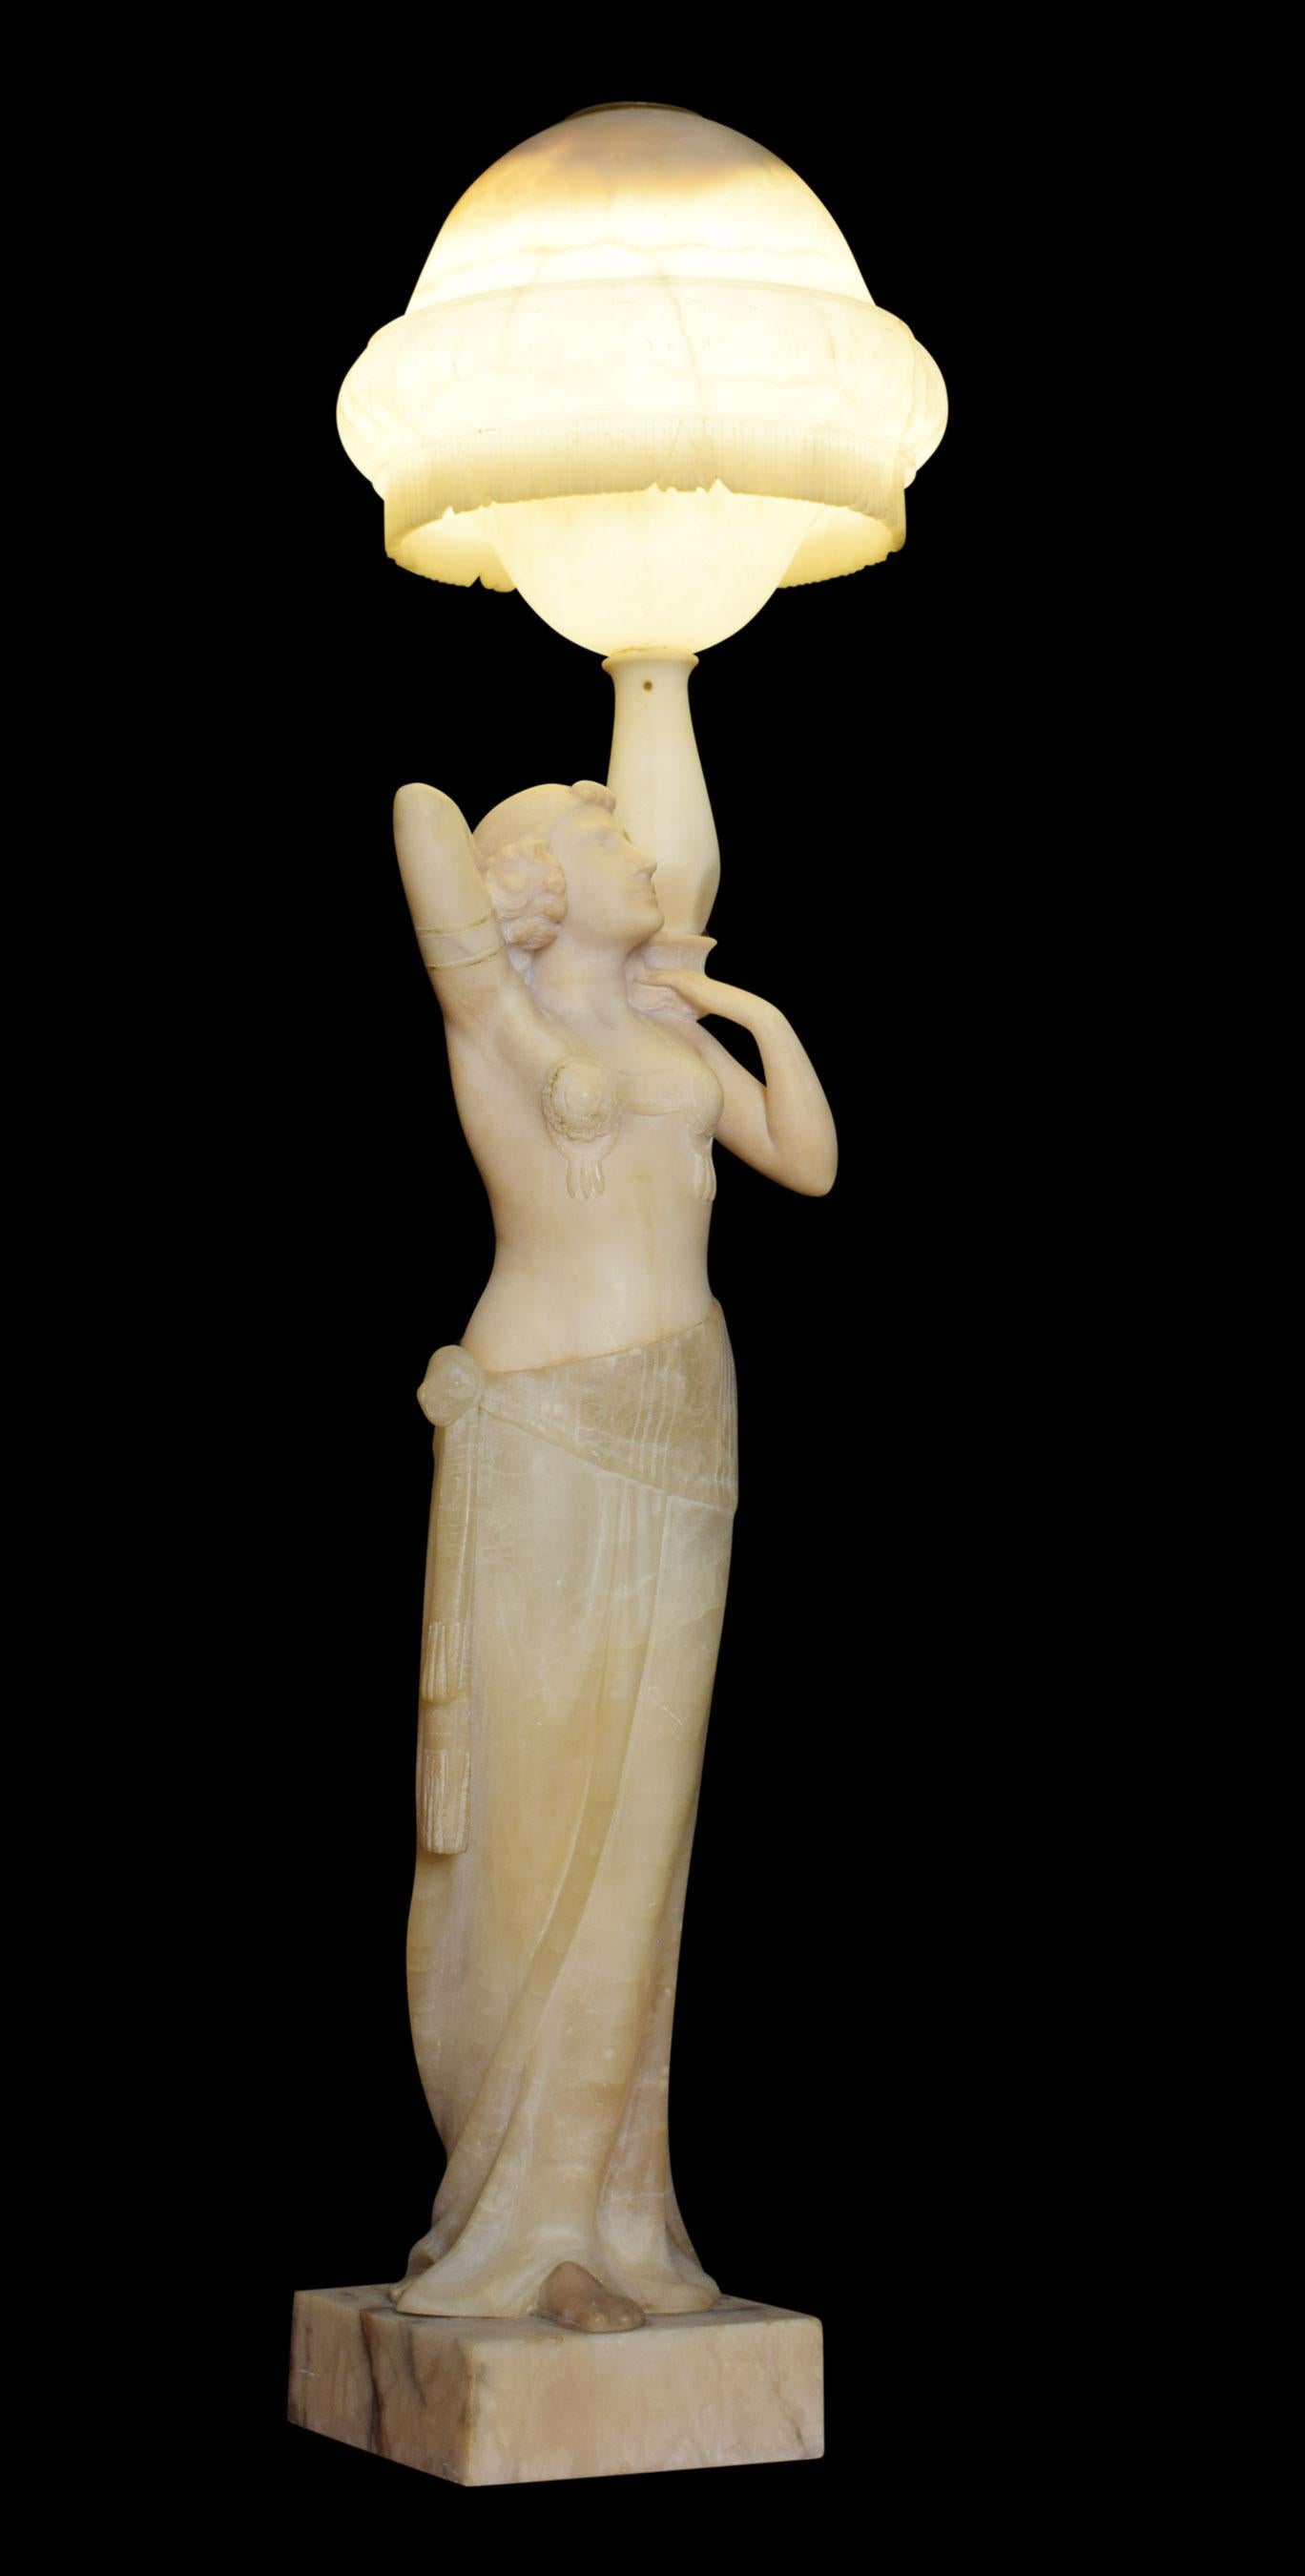 Art Deco alabaster figural lamp modelled as an Egyptian Revival dancing girl having arms raised below the bowl-shaped shade. The lamp has been rewired.
Dimensions
Height 40 inches
Width 11.5 inches
Depth 11.5 inches.